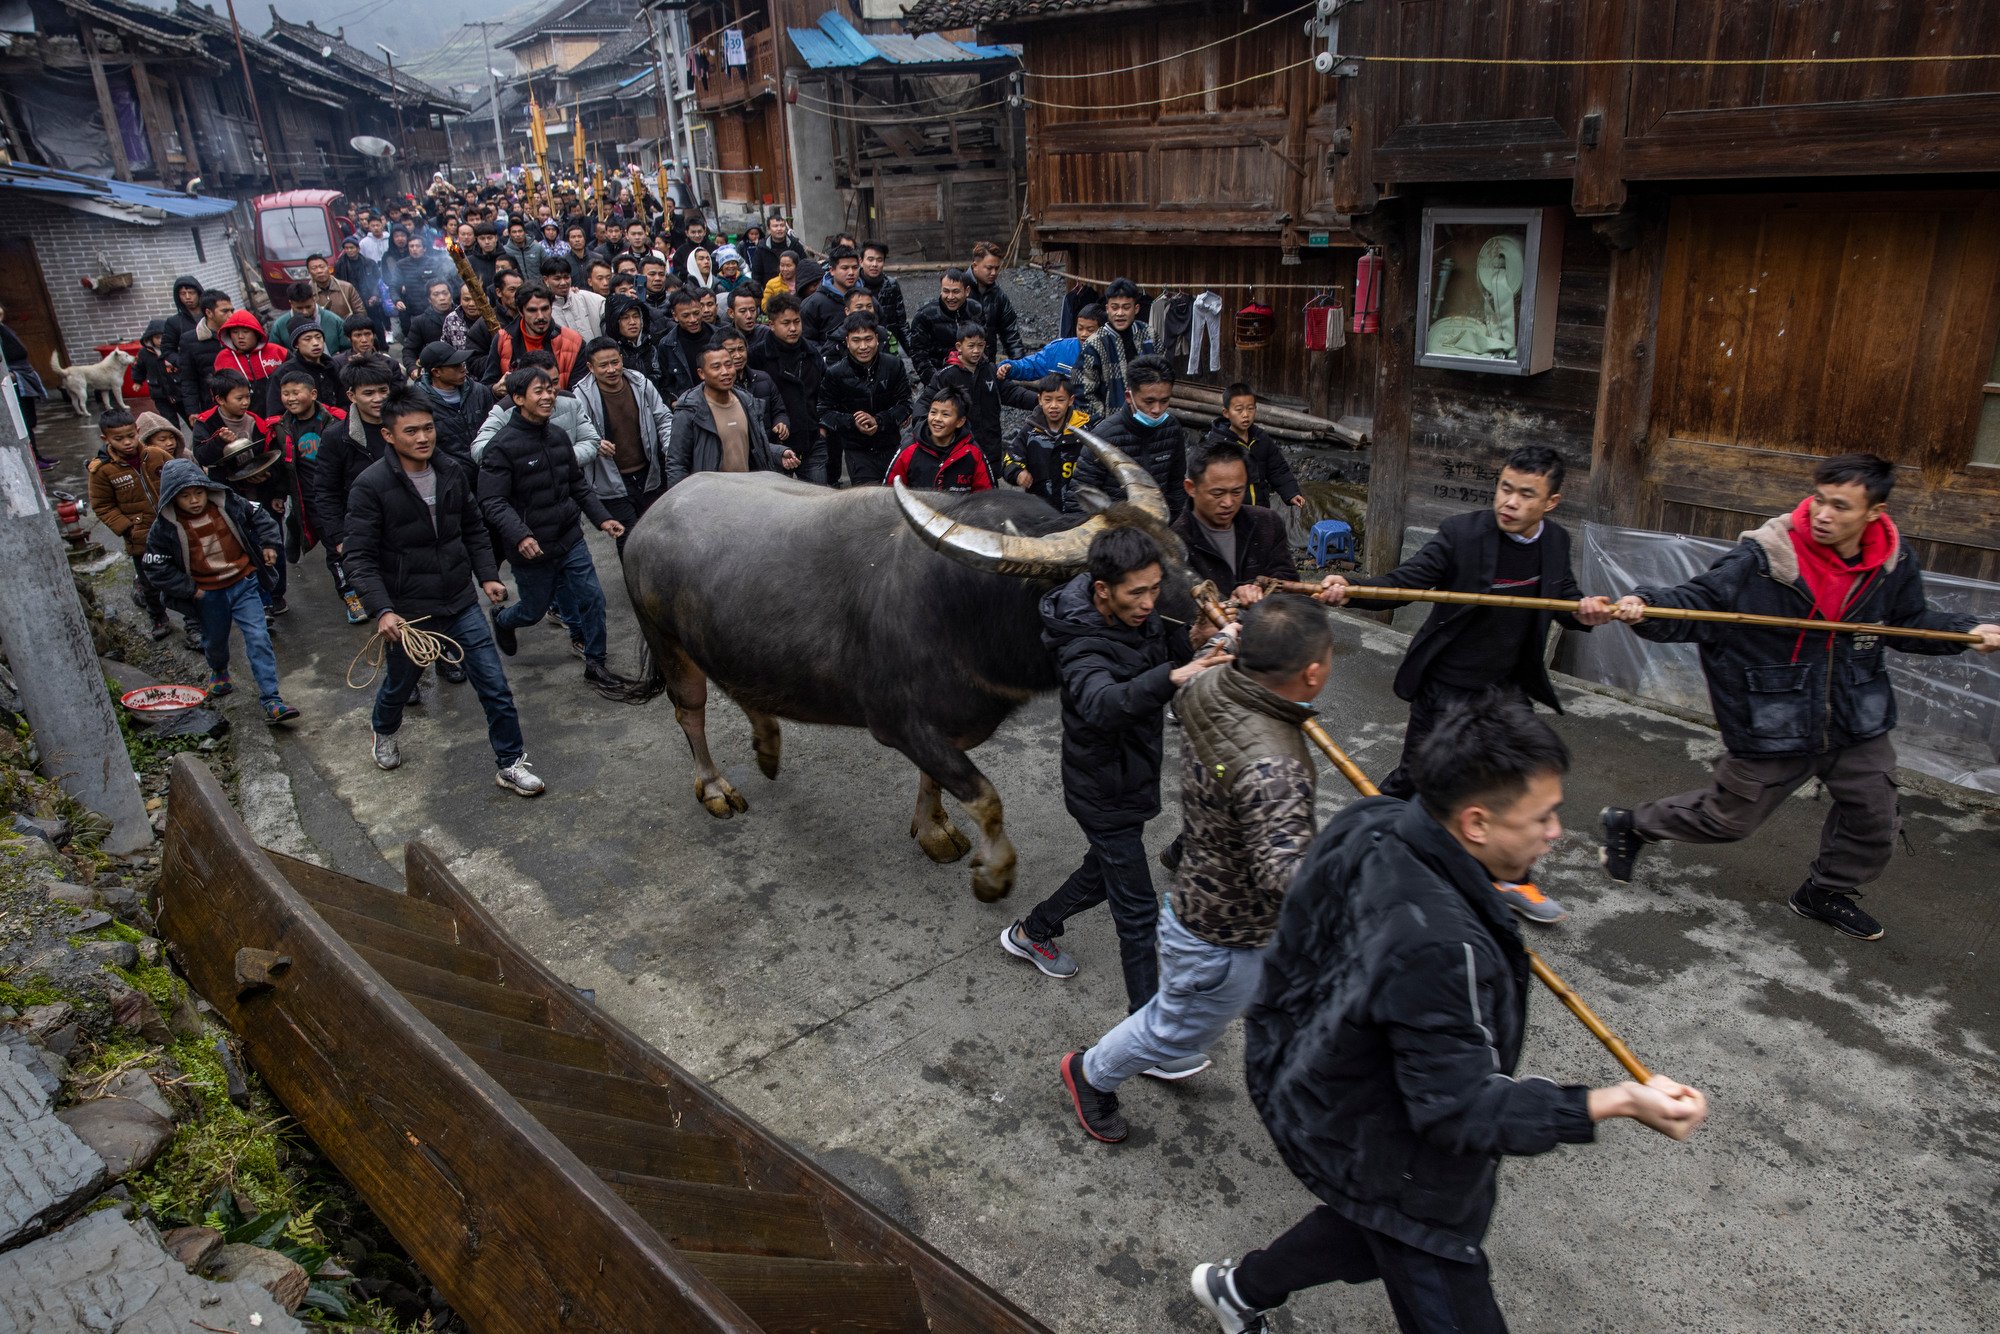  The villagers accompany the buffalo to the arena, where it will attend the first fight of the year. Zhengying village in Guizhou, China. 